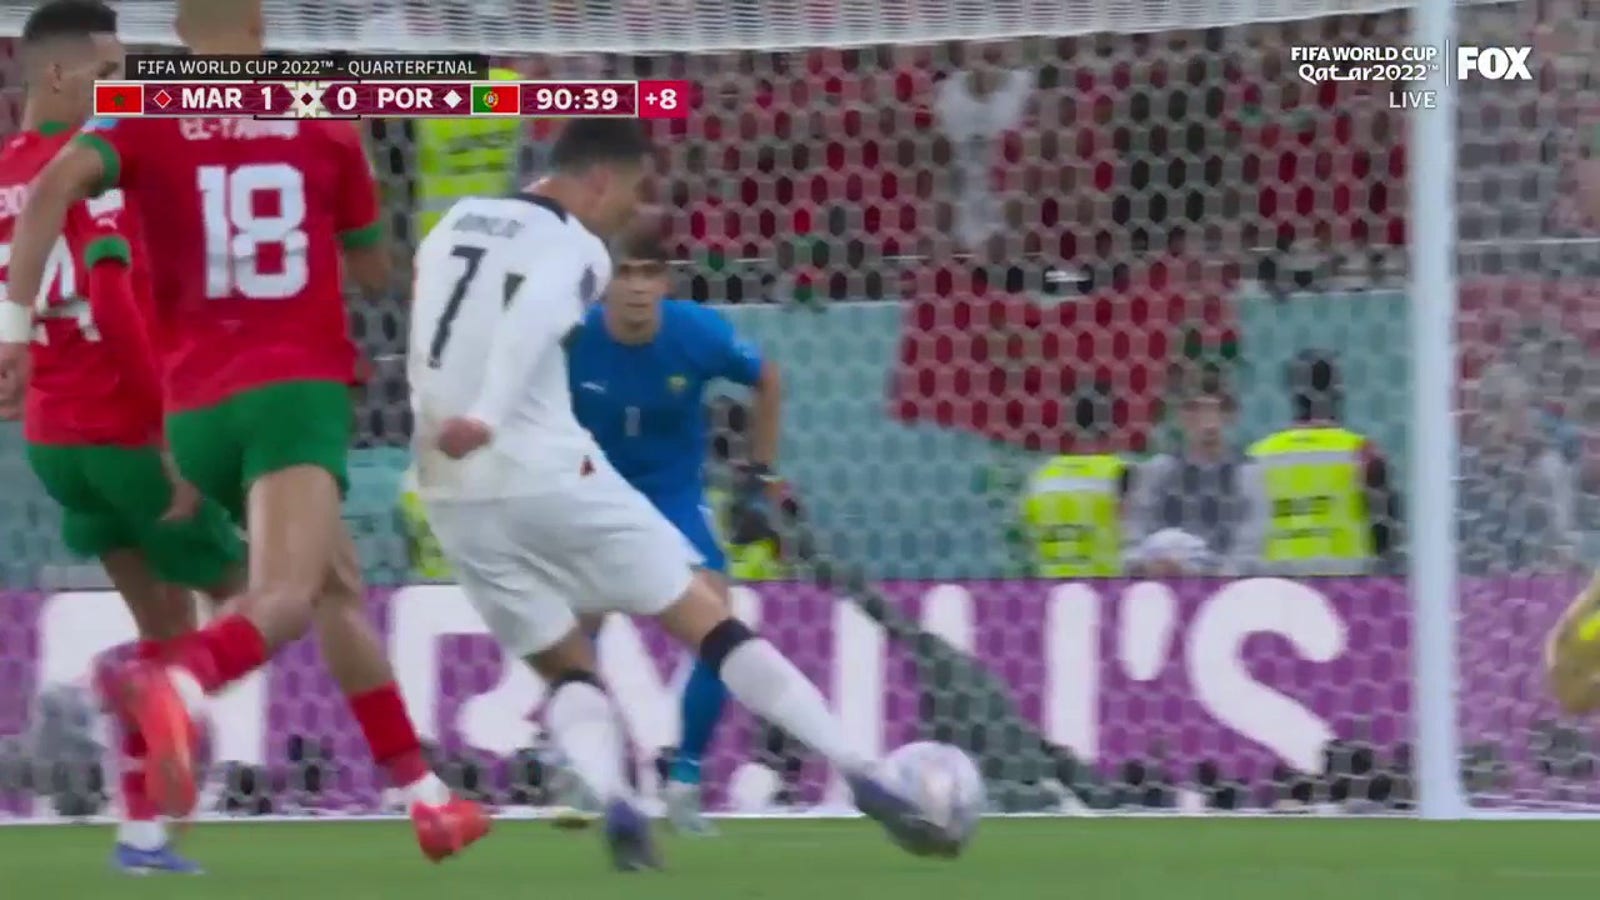 Cristiano Ronaldo came THIS CLOSE to tying the game for Portugal